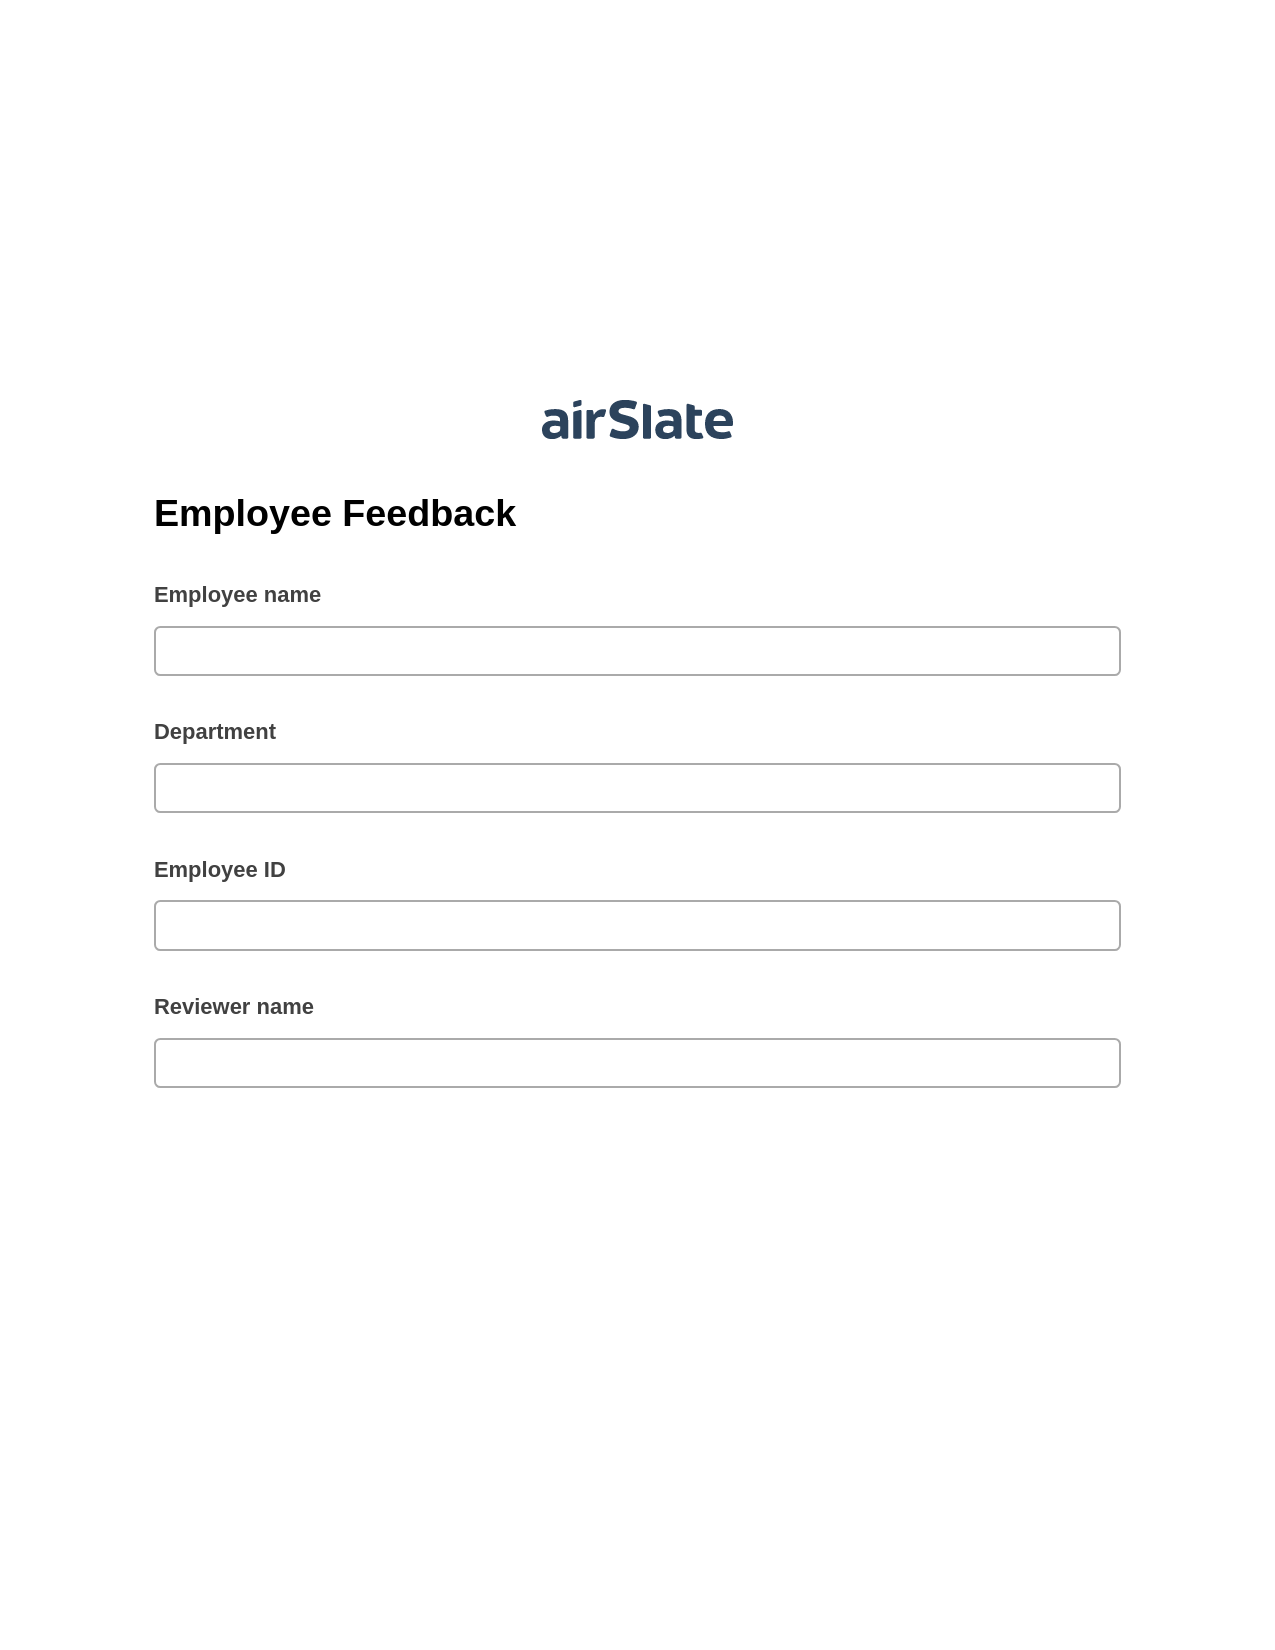 Employee Feedback Pre-fill from Google Sheets Bot, Reminder Bot, Archive to SharePoint Folder Bot